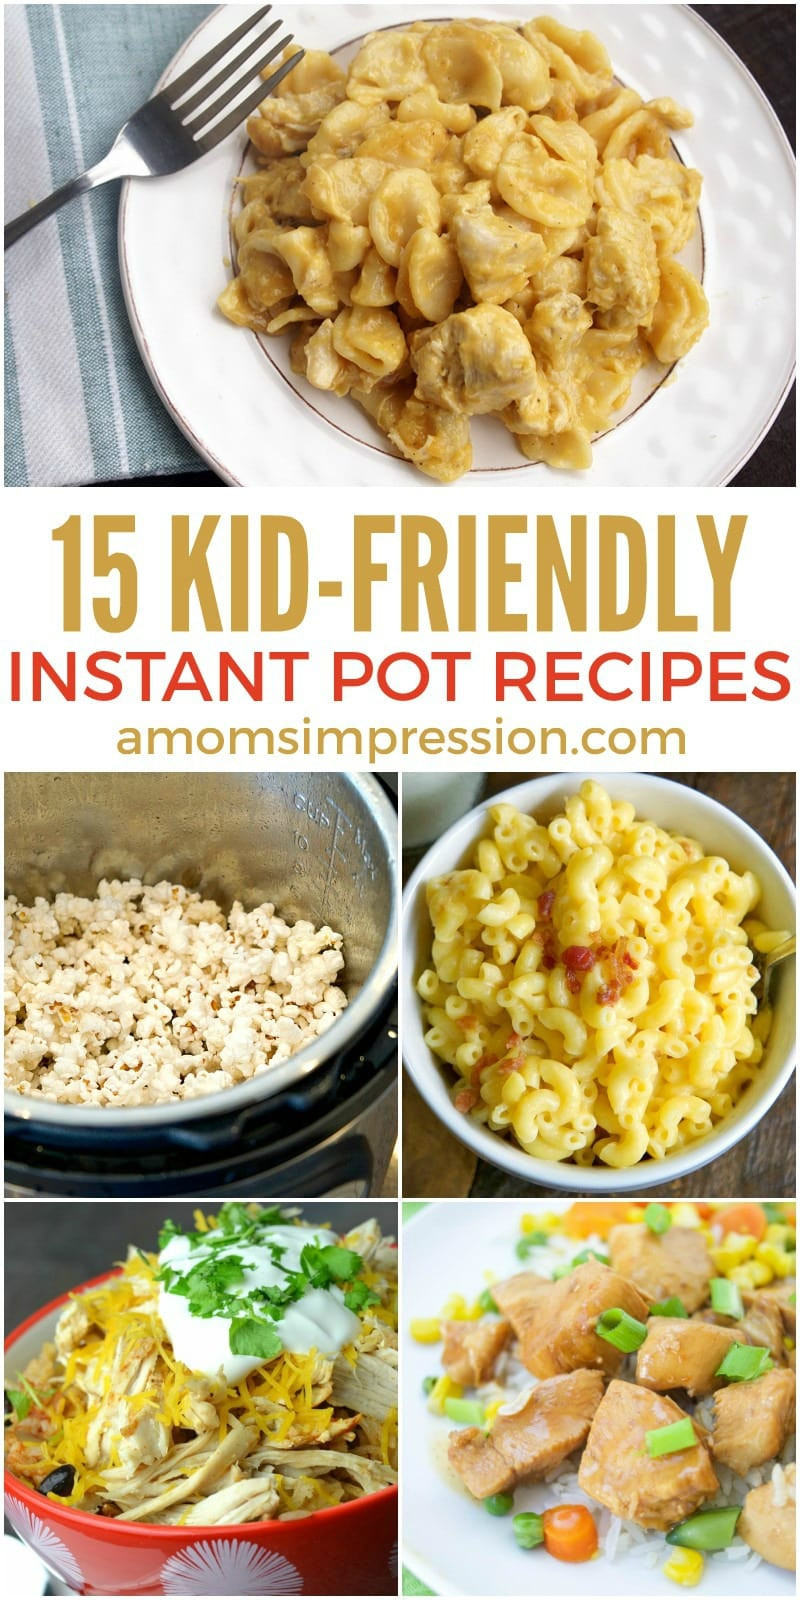 Easy Kid Friendly Dinner Recipe
 15 Quick and Easy Kid Friendly Instant Pot Recipes